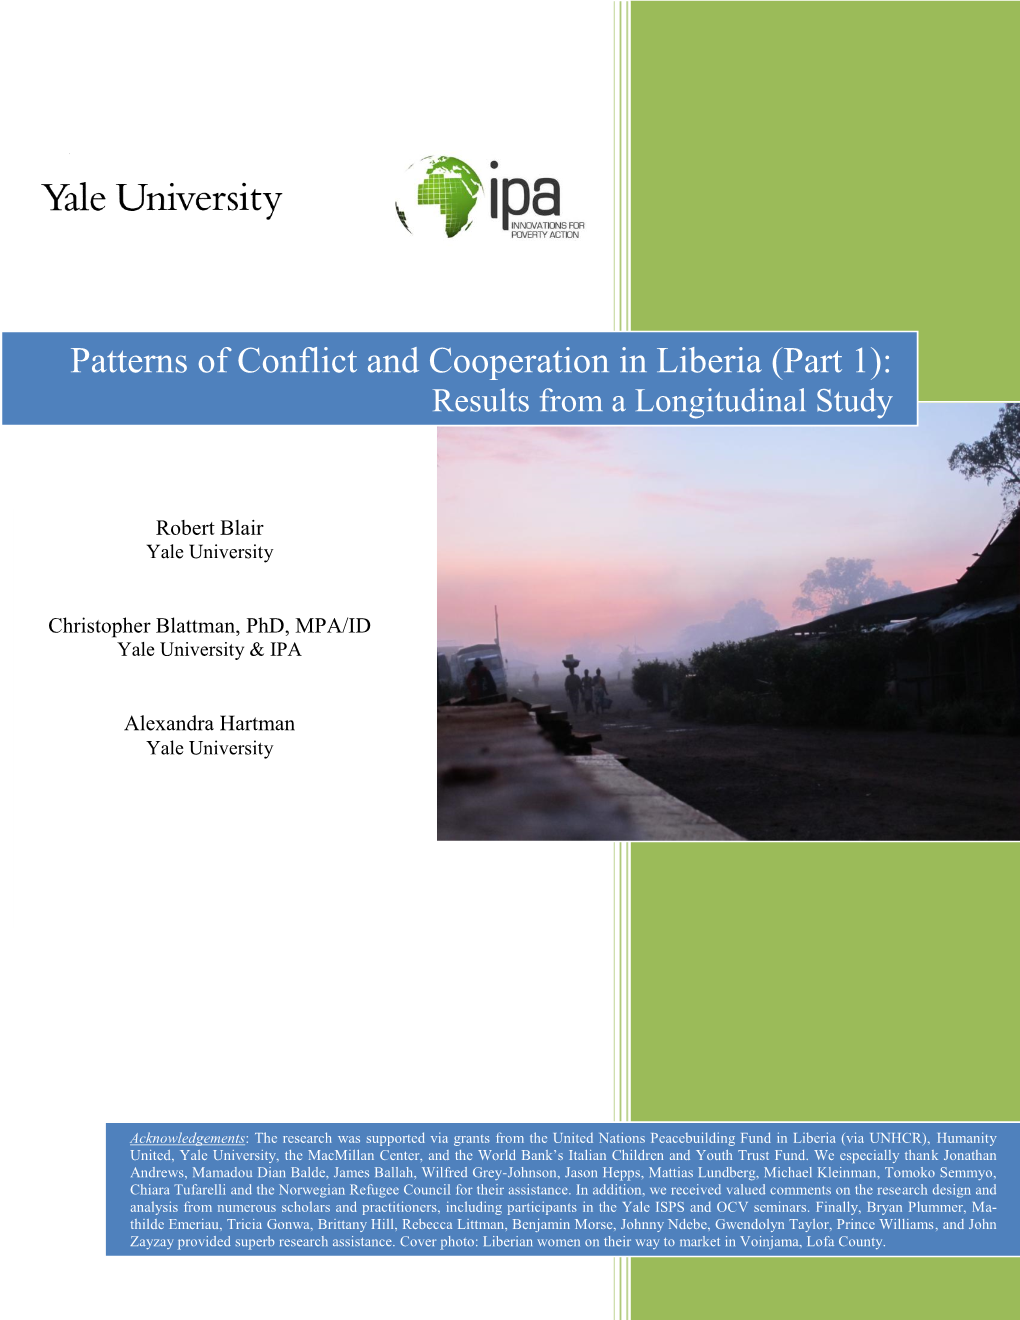 Patterns of Conflict and Cooperation in Liberia (Part 1): Results from a Longitudinal Study